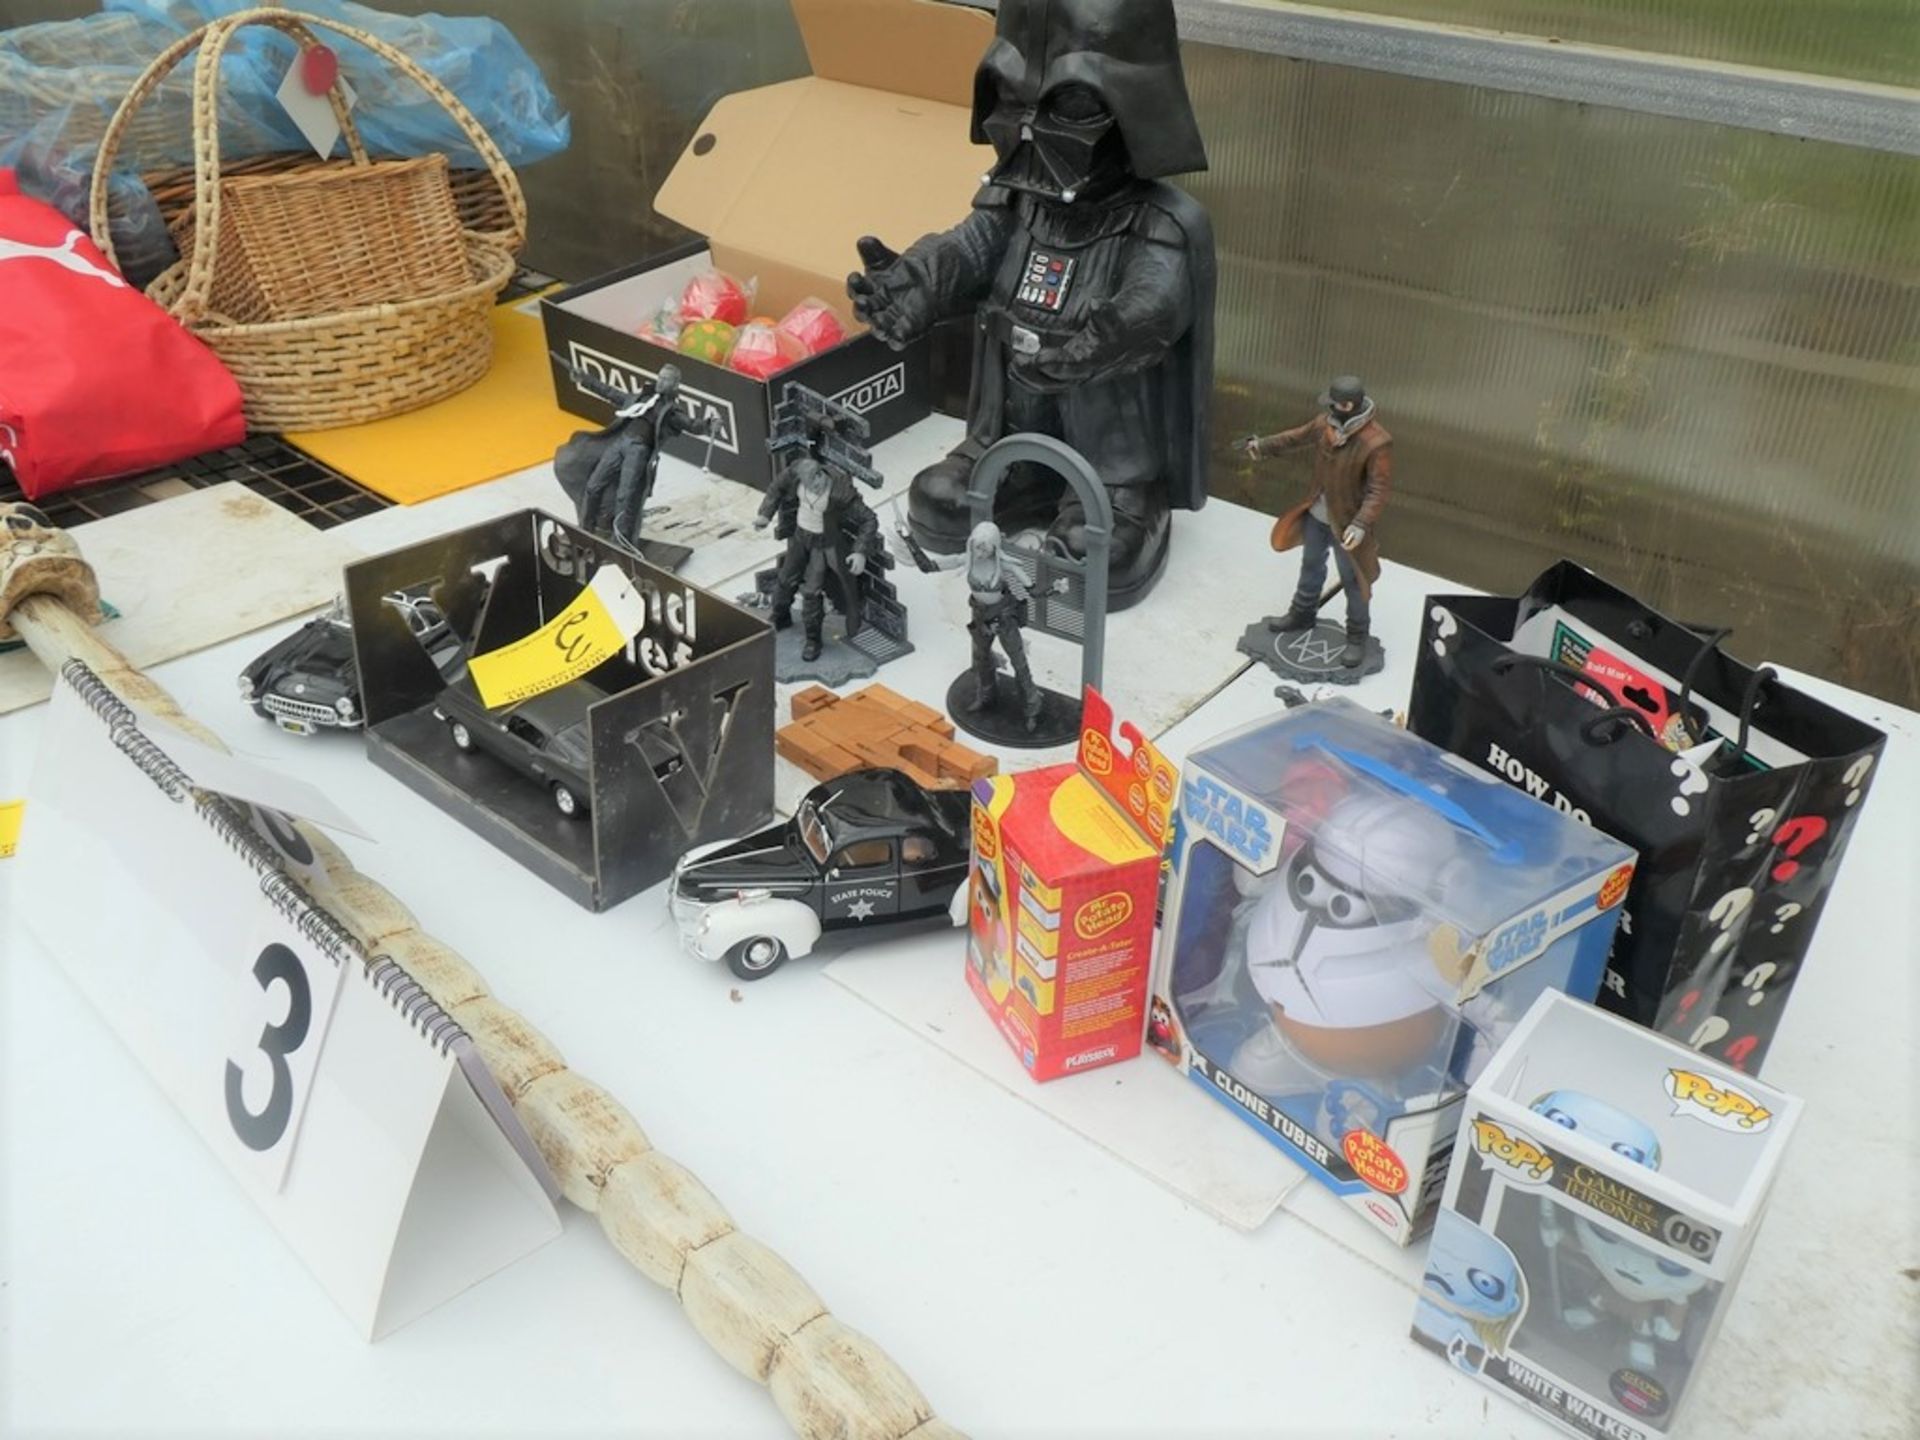 L/O GOTHIC FIGURINES, STAR WARS, DIE CAST CARS - Image 2 of 2